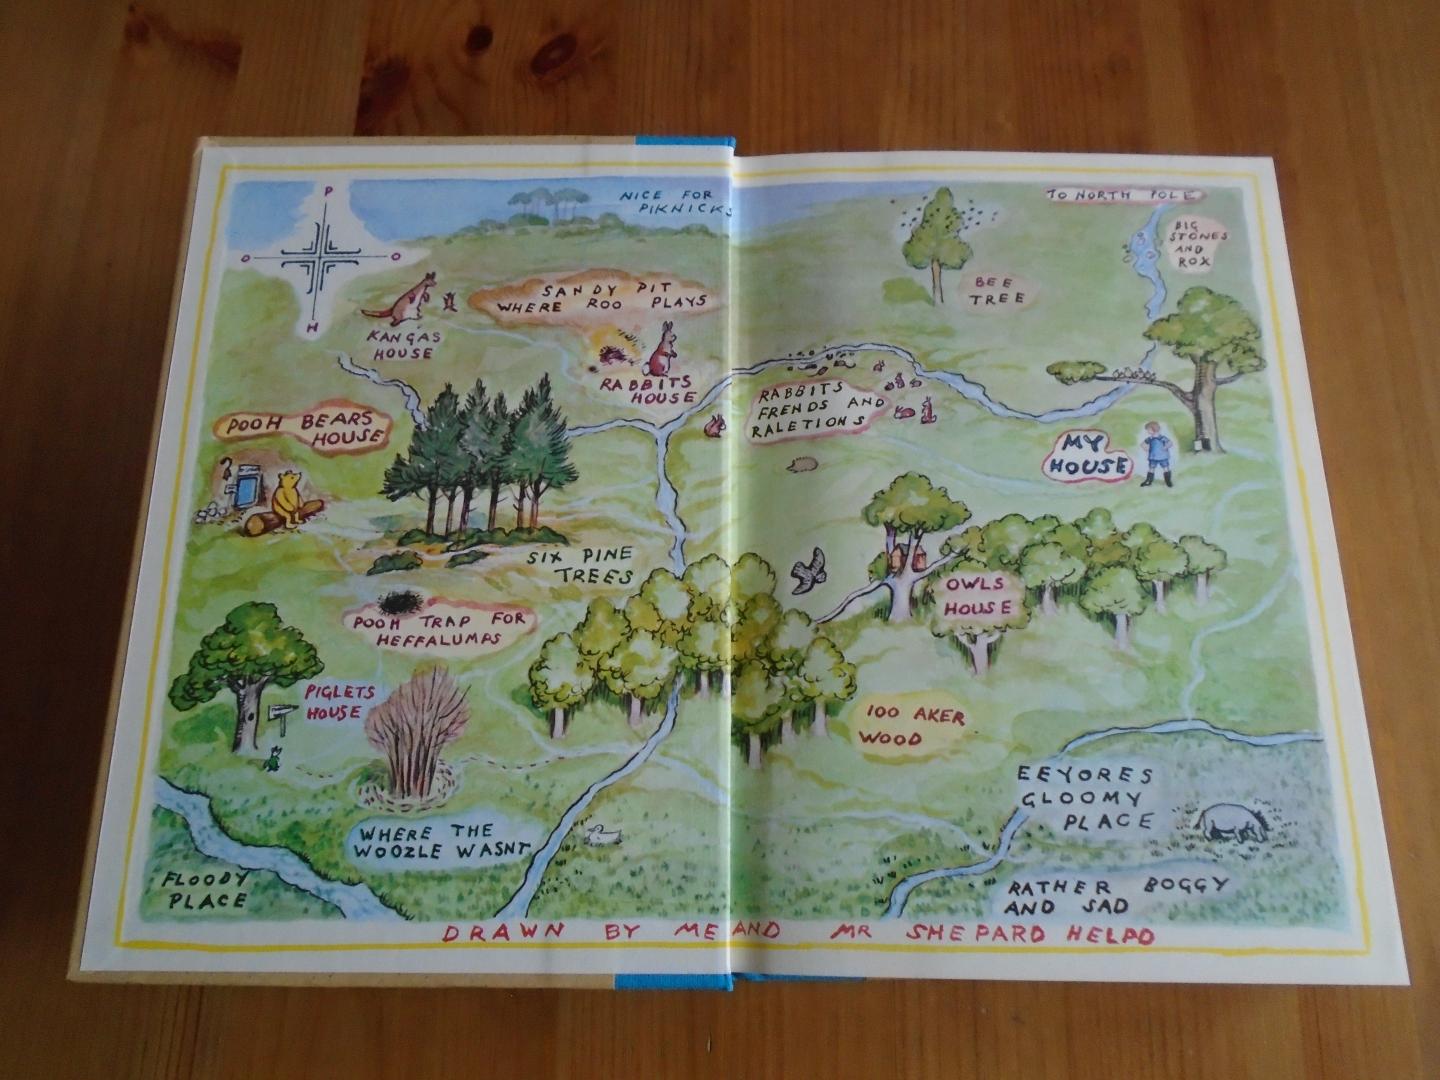 Milne, A.A. - The World of Pooh. The Complete Winnie-the-Pooh and The House At Pooh Corner